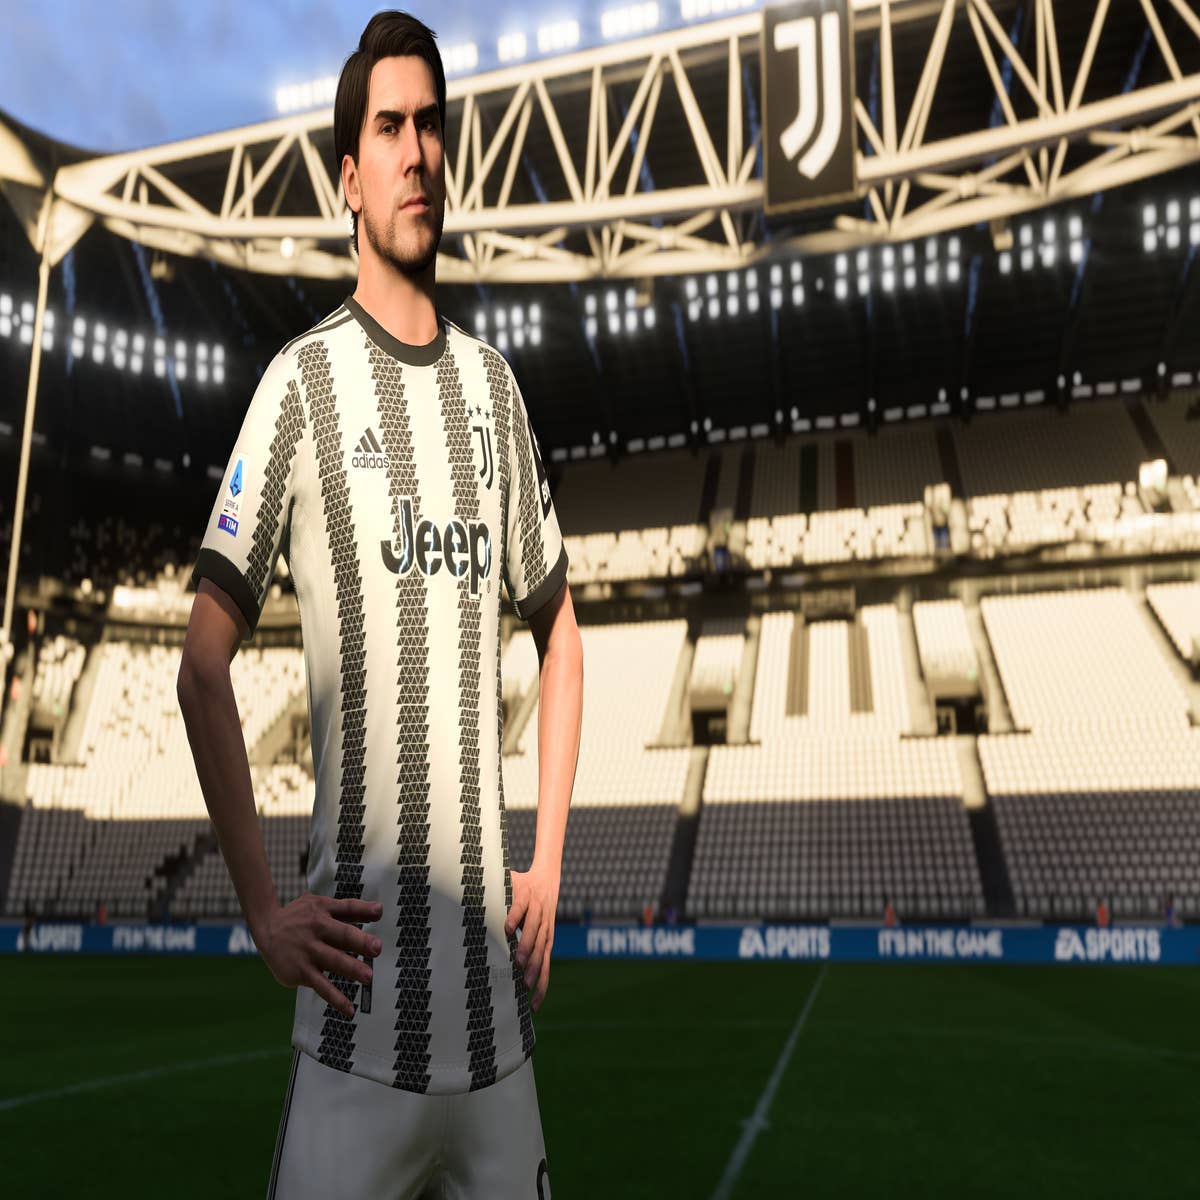 Stream FIFA 23 PC Exclusive on Sports Gaming Channel 4 by Sports Gaming  Channel 4